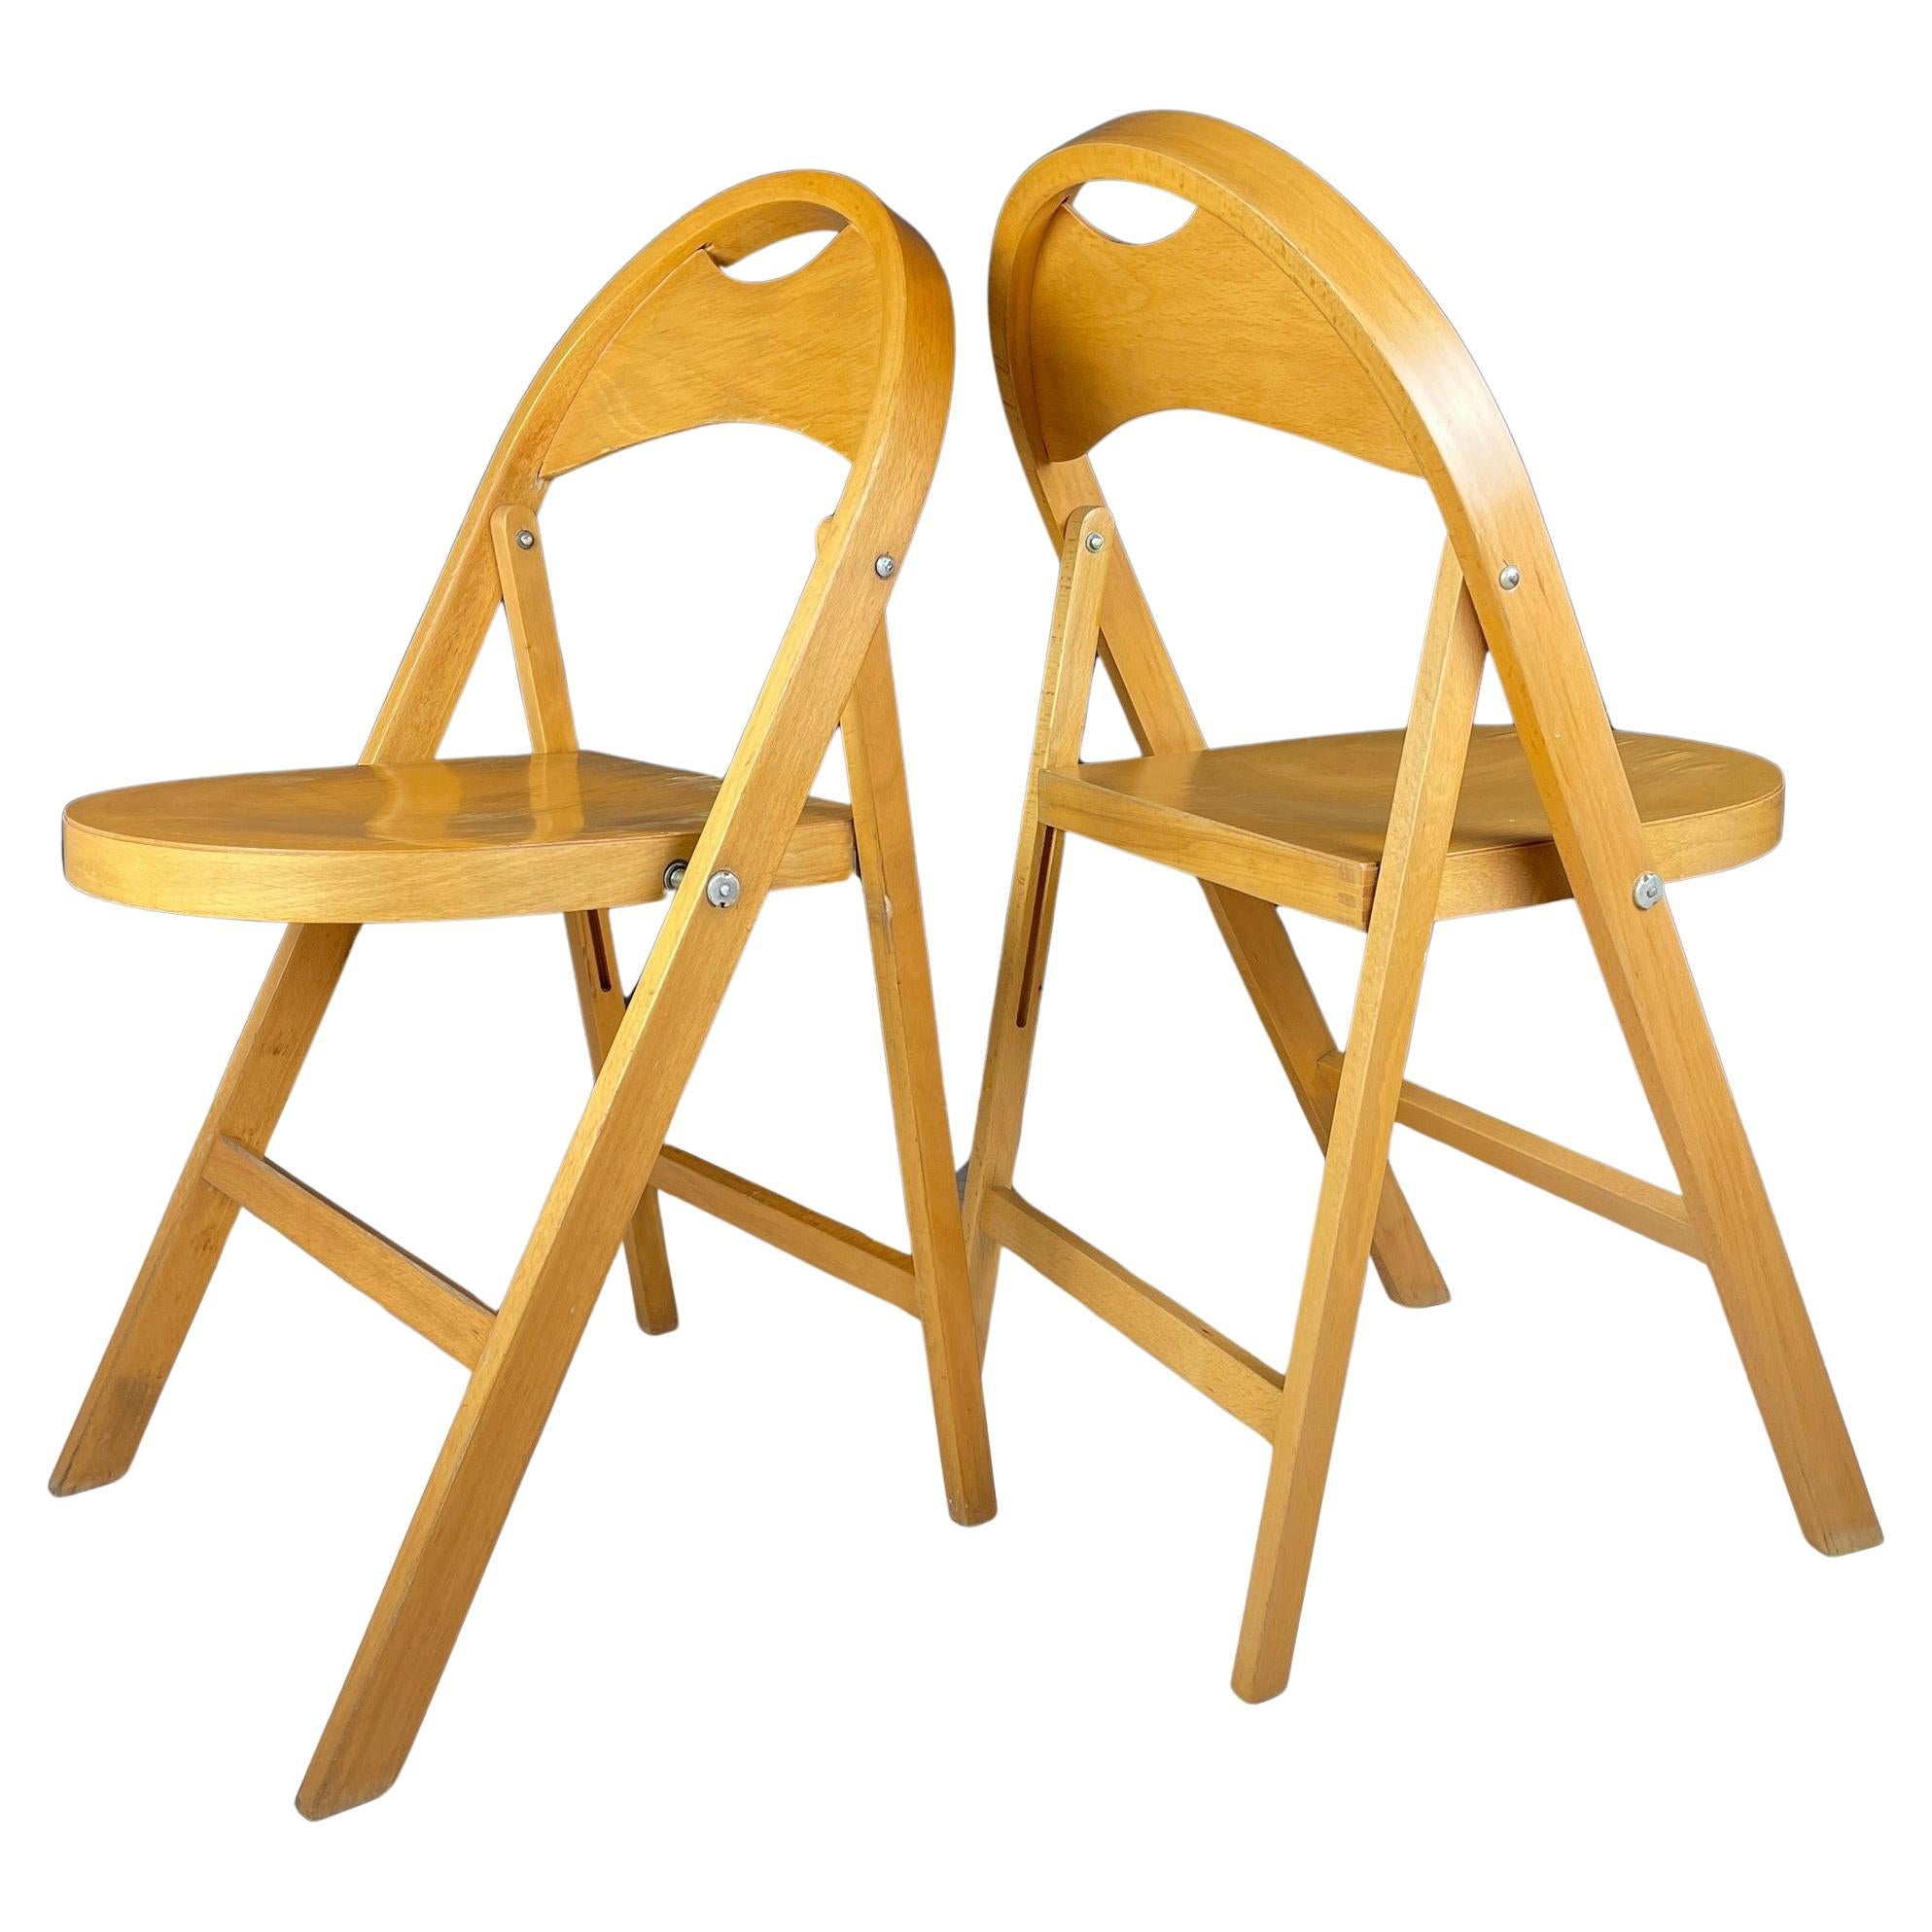 Folding Chairs "Tric" by Achille & Pier Giacomo Castiglione  Italy 1965 Set of 2